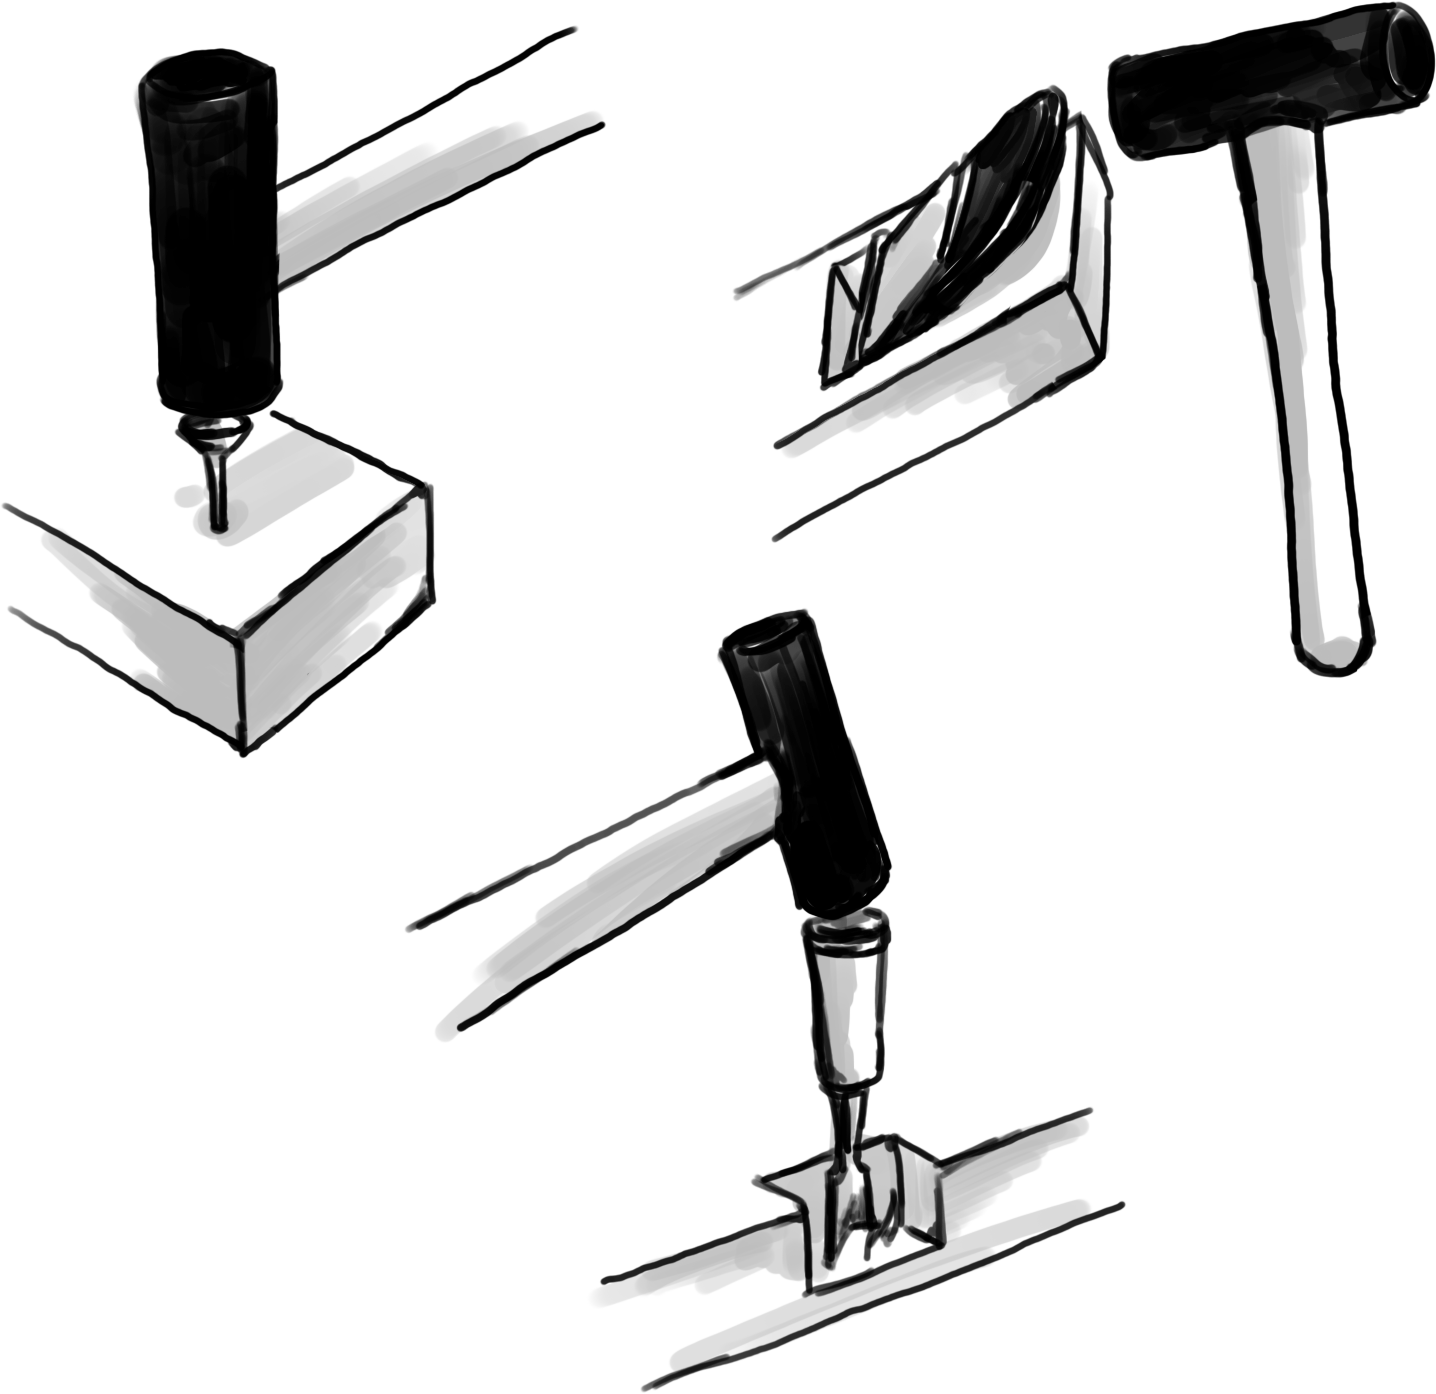 The figure of using a hammer with multiple tools